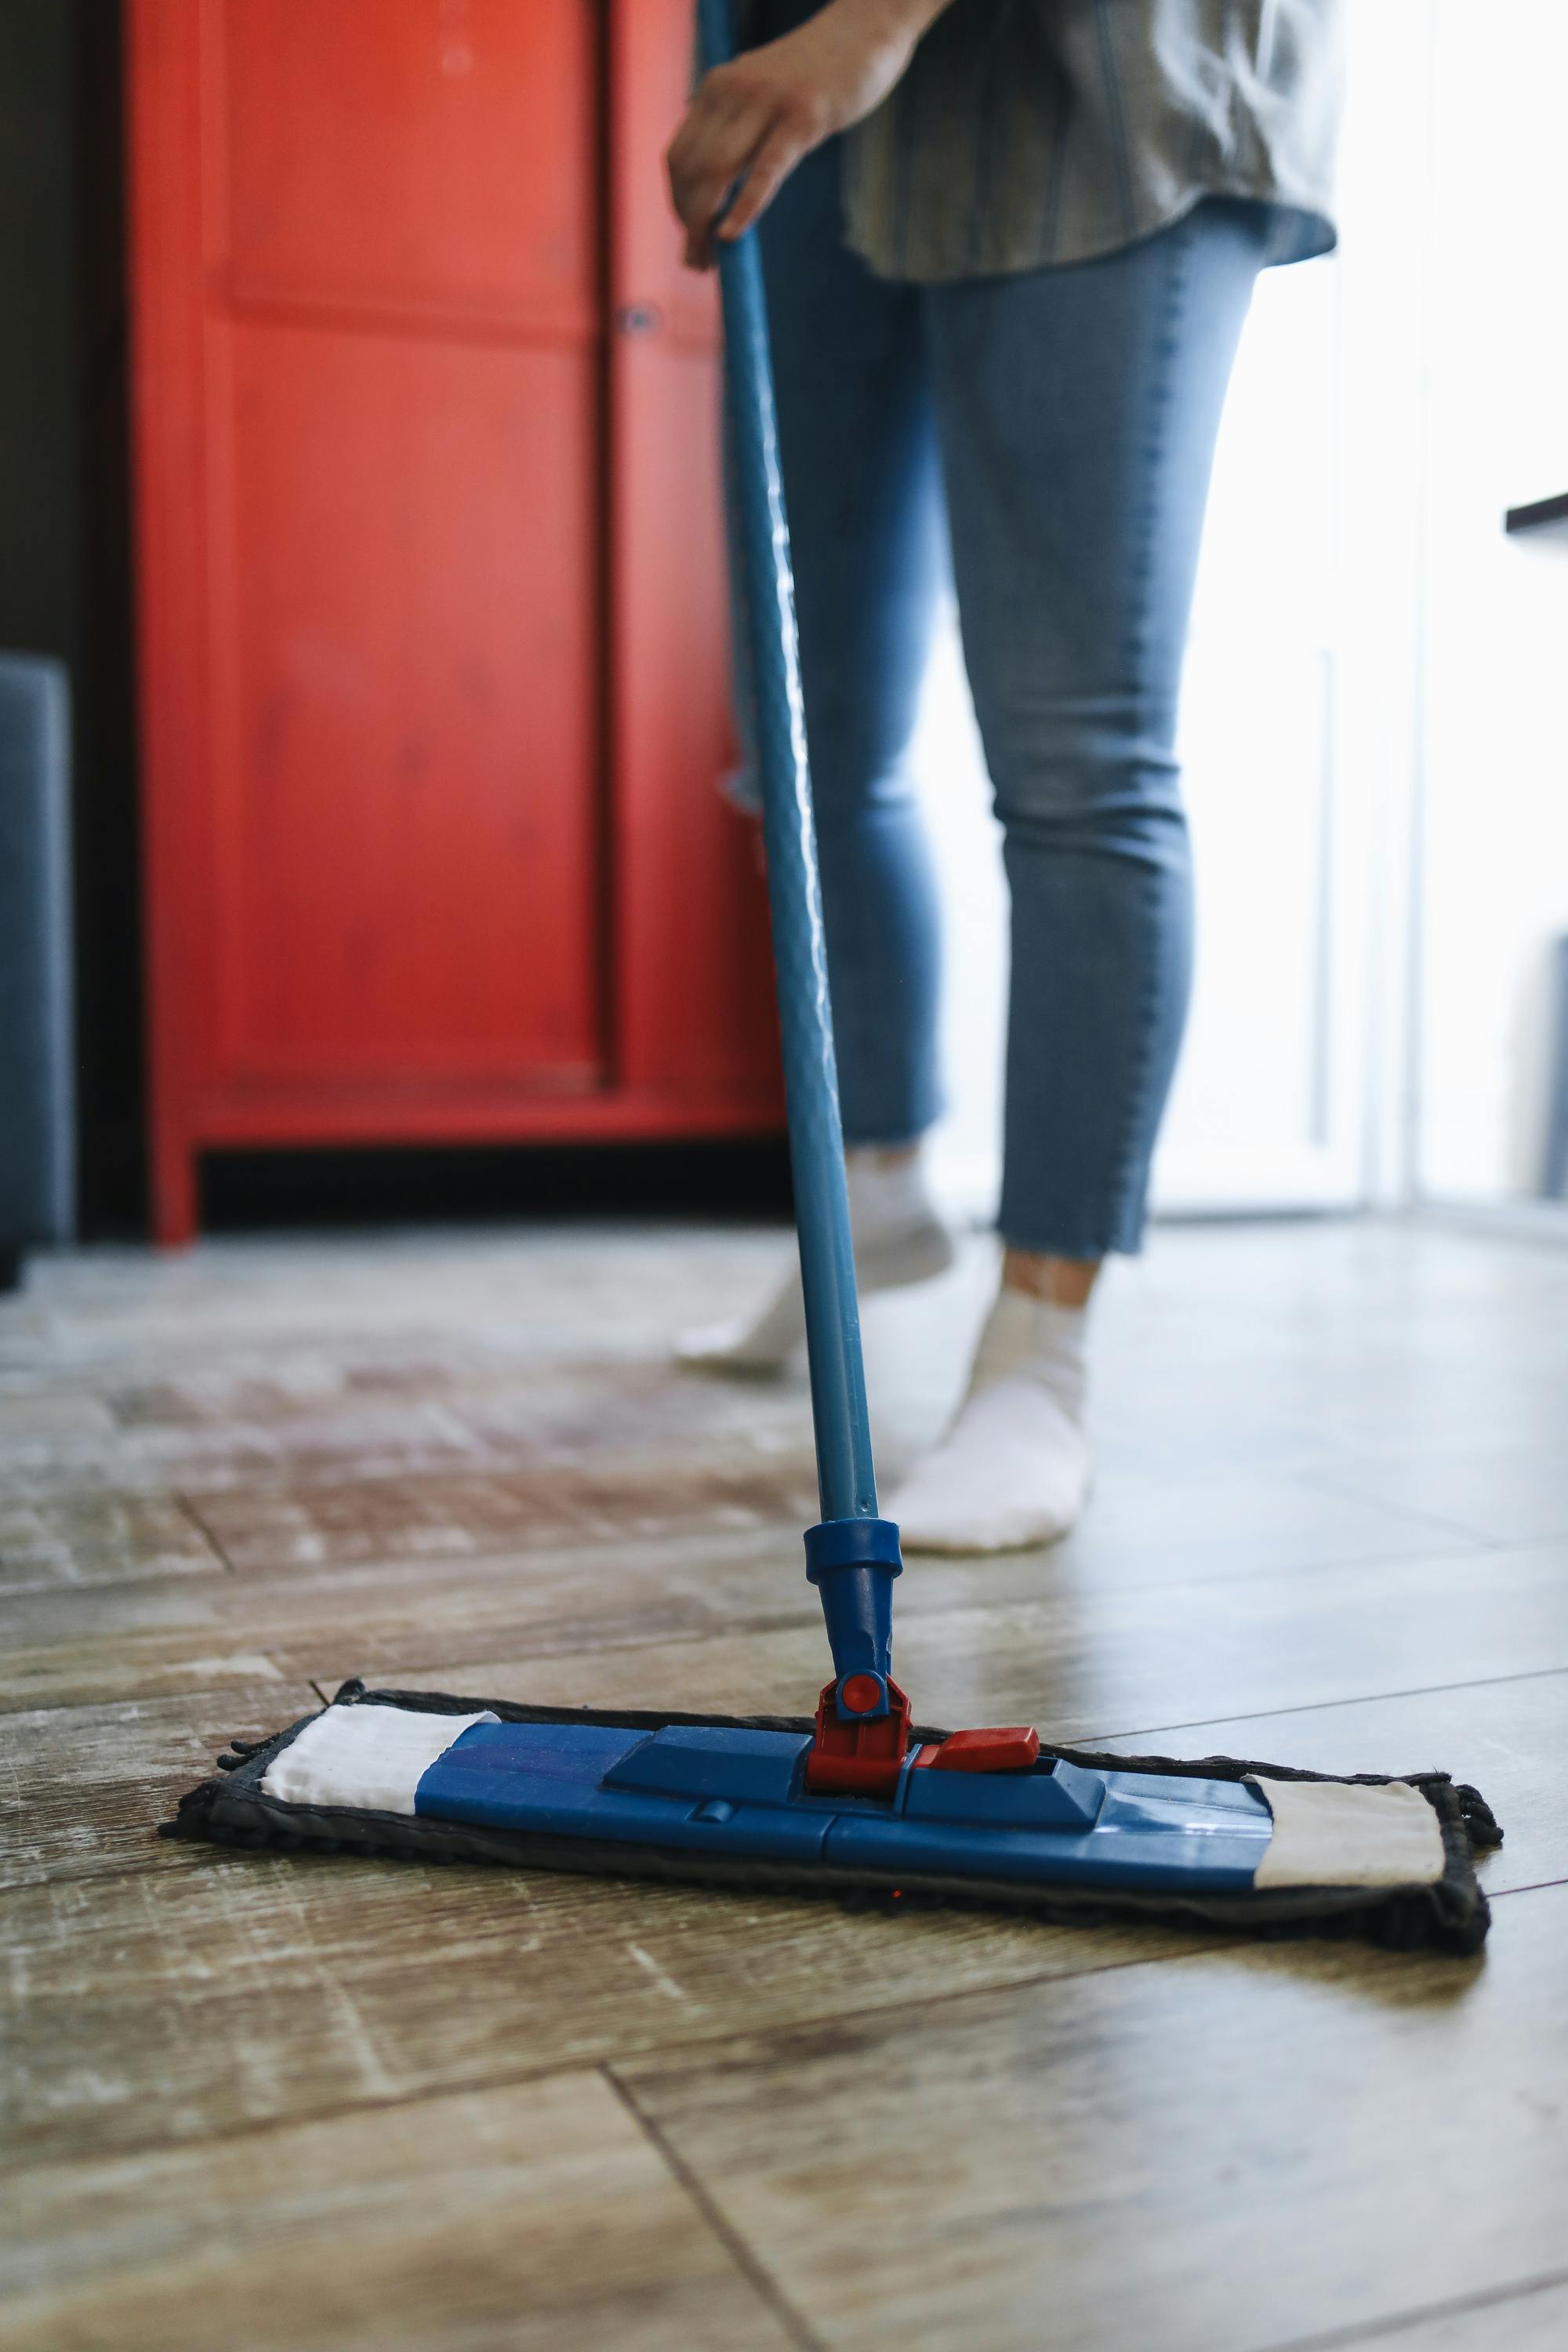 Someone holding a mop while cleaning | Source: Pexels